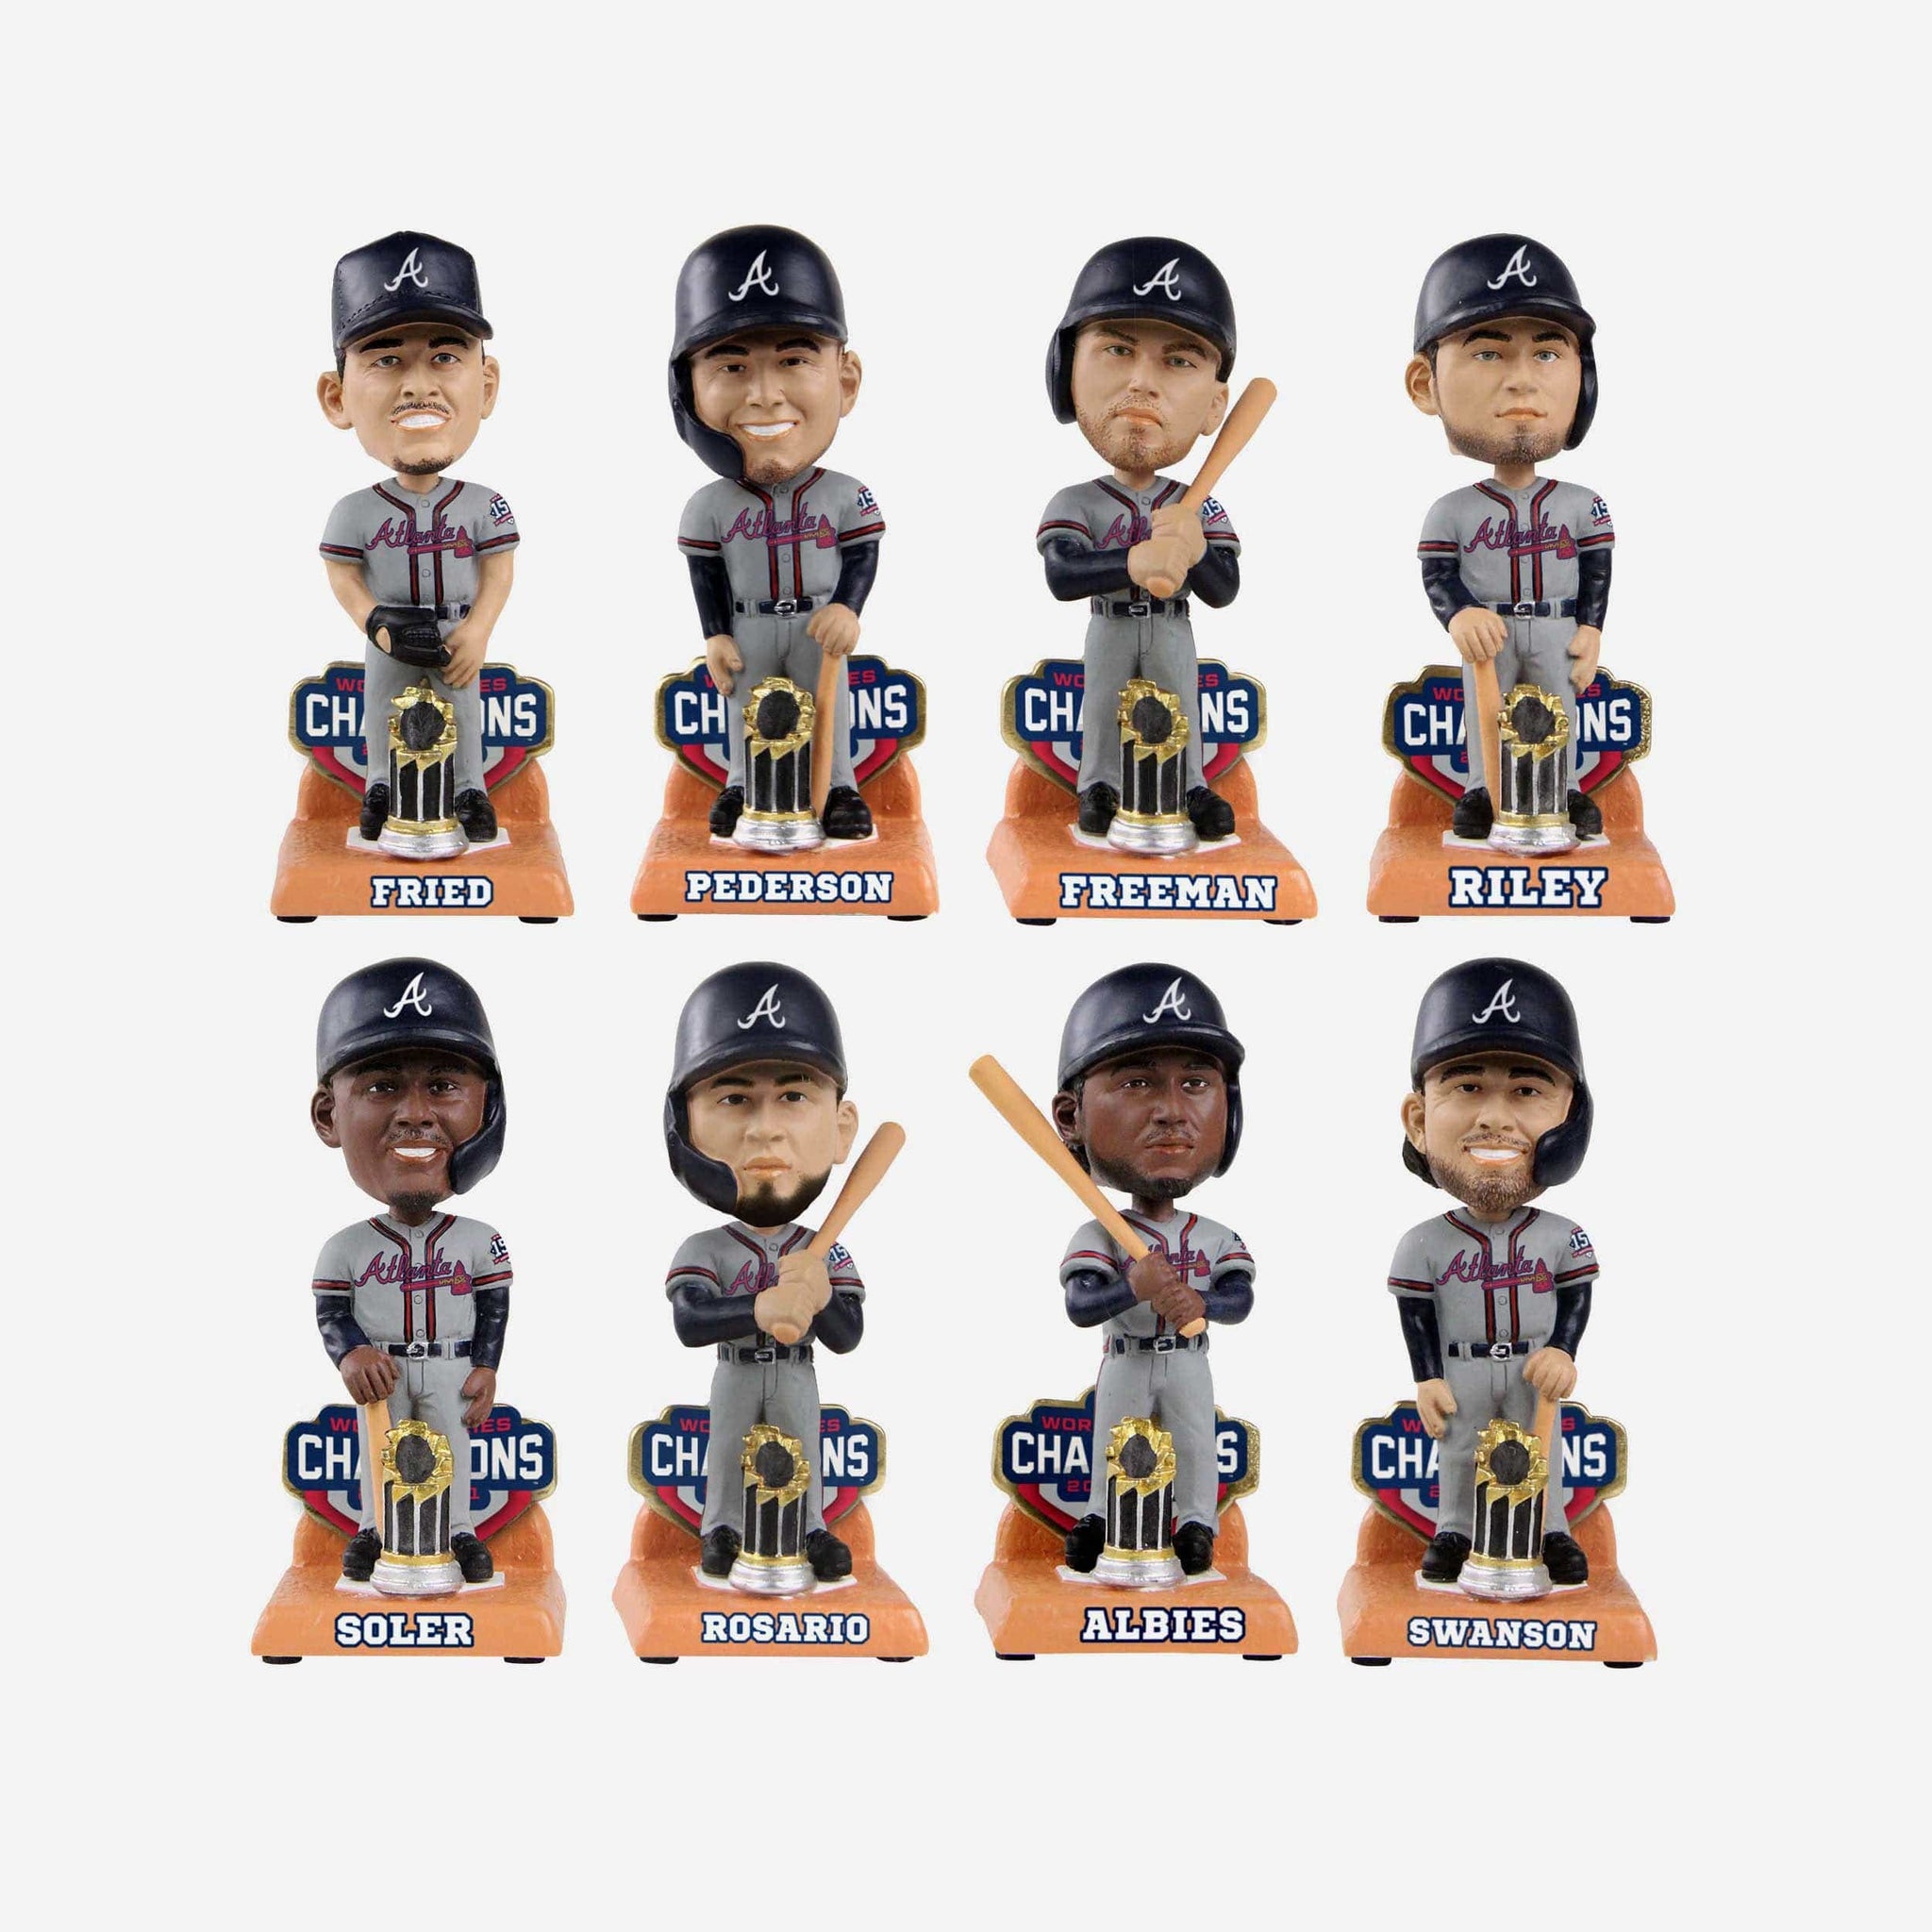 Atlanta Braves World Series championship gear: Here's how to get ornaments,  bobbleheads, more 